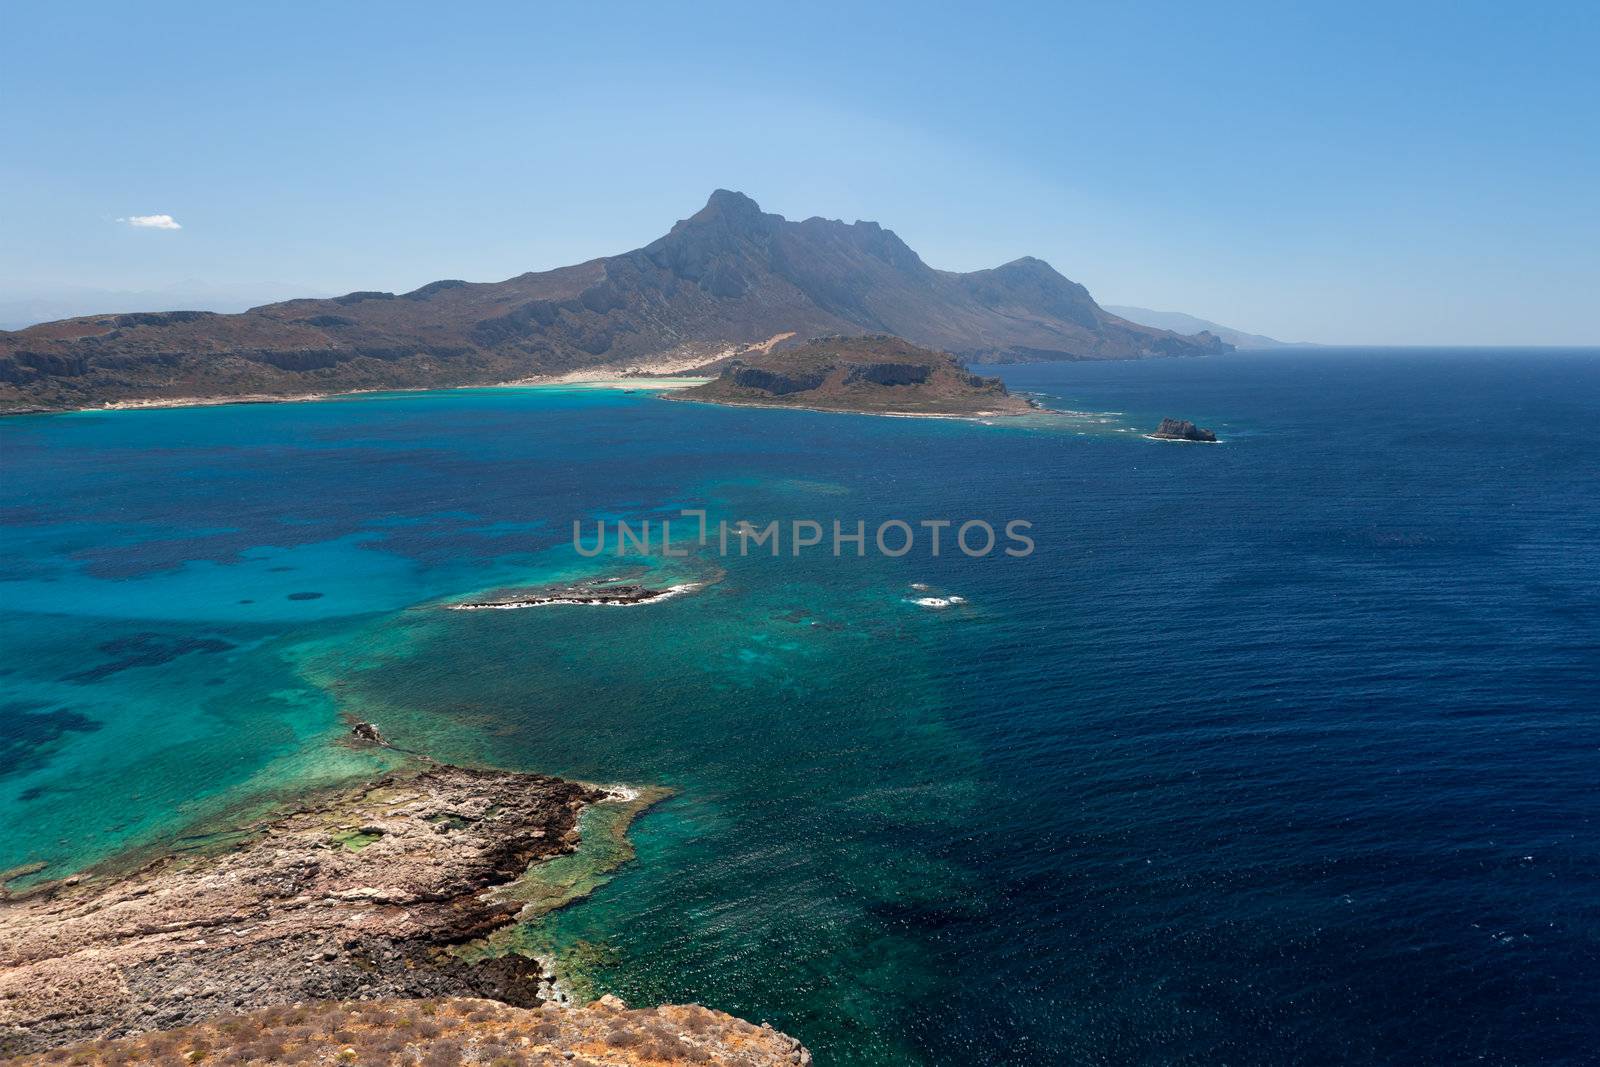 View of the Bay of Balos by DimasEKB